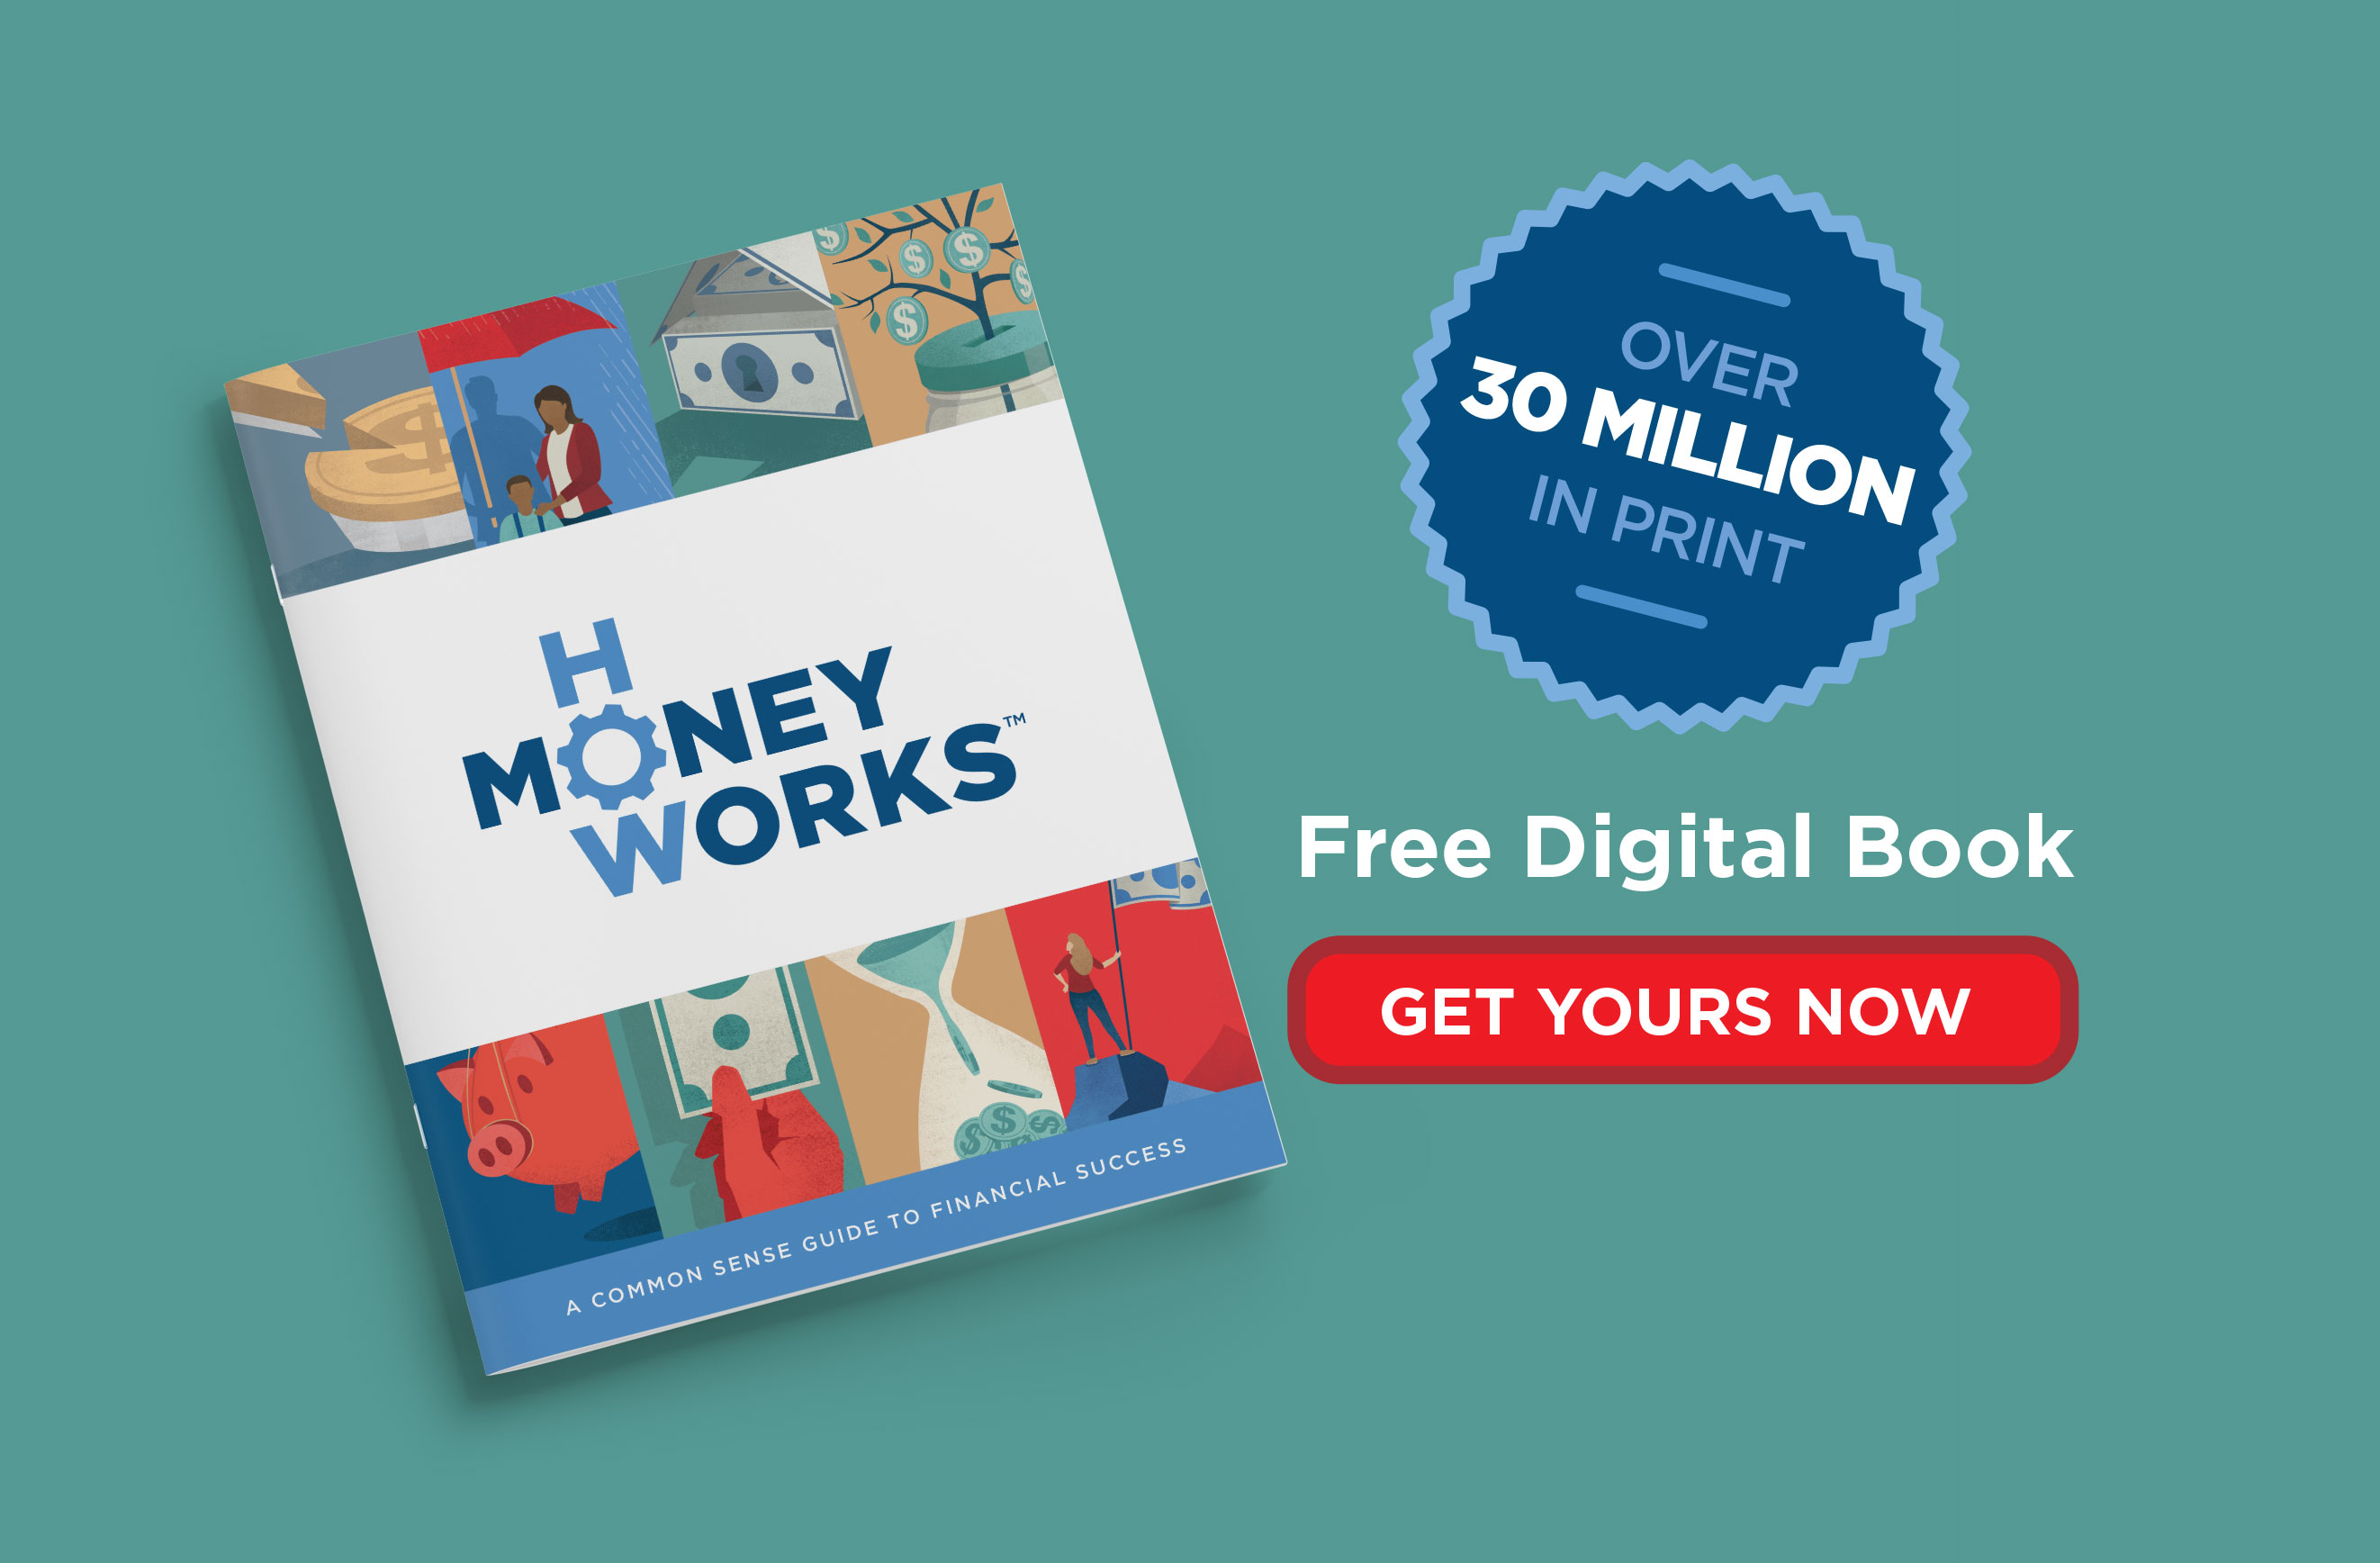 Over 30 Million in Print - Free Digital Book - Get Yours Now